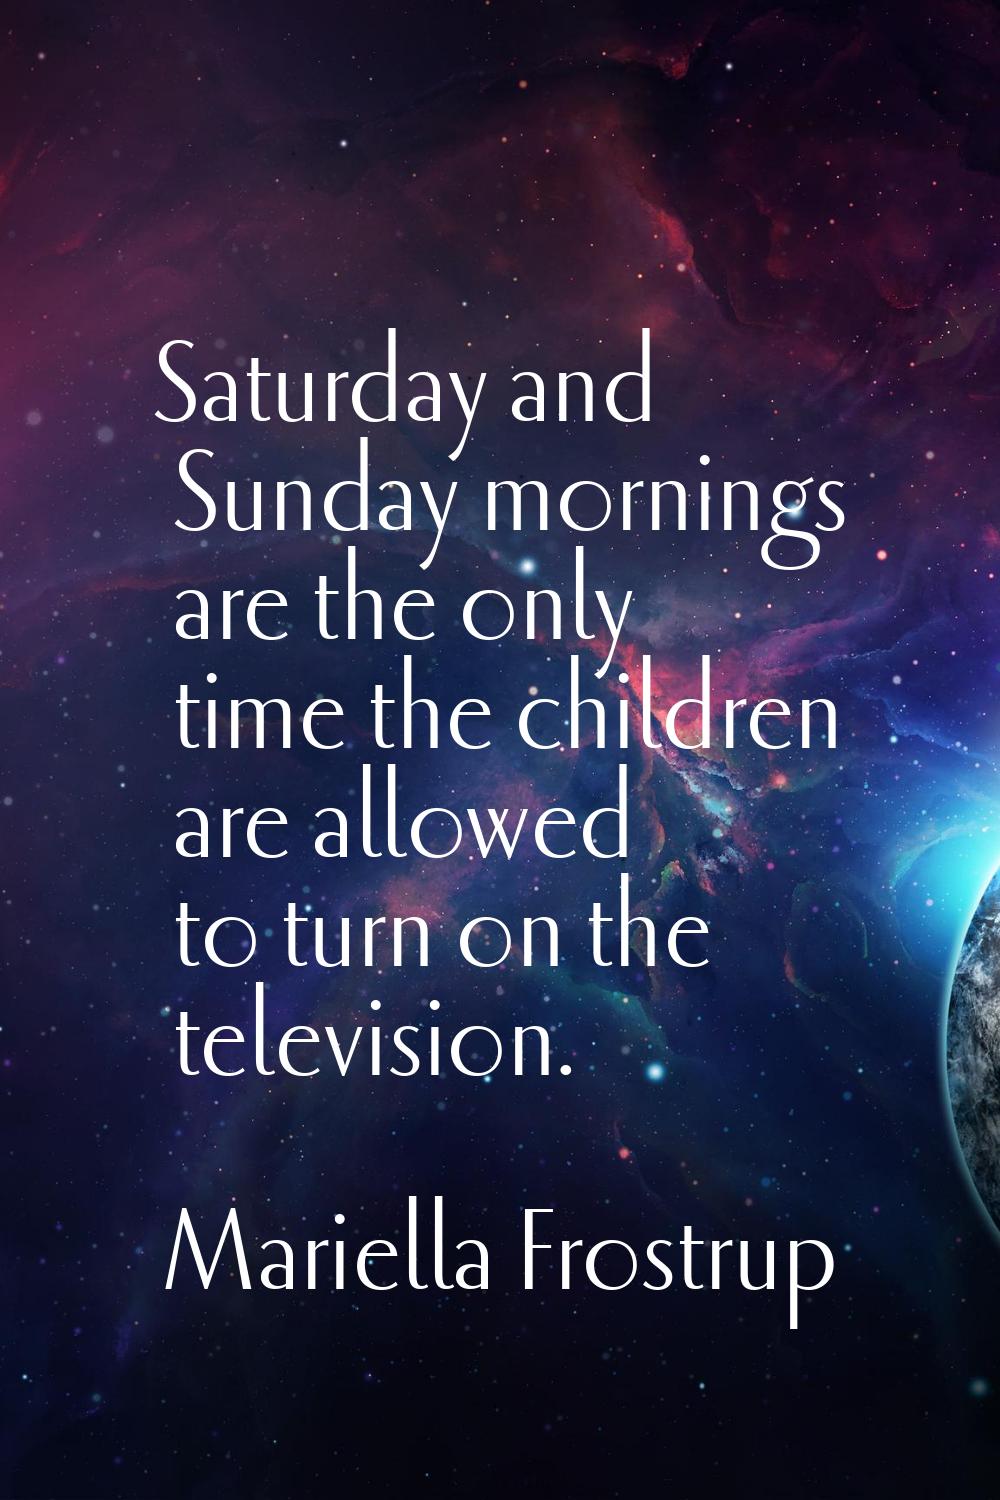 Saturday and Sunday mornings are the only time the children are allowed to turn on the television.